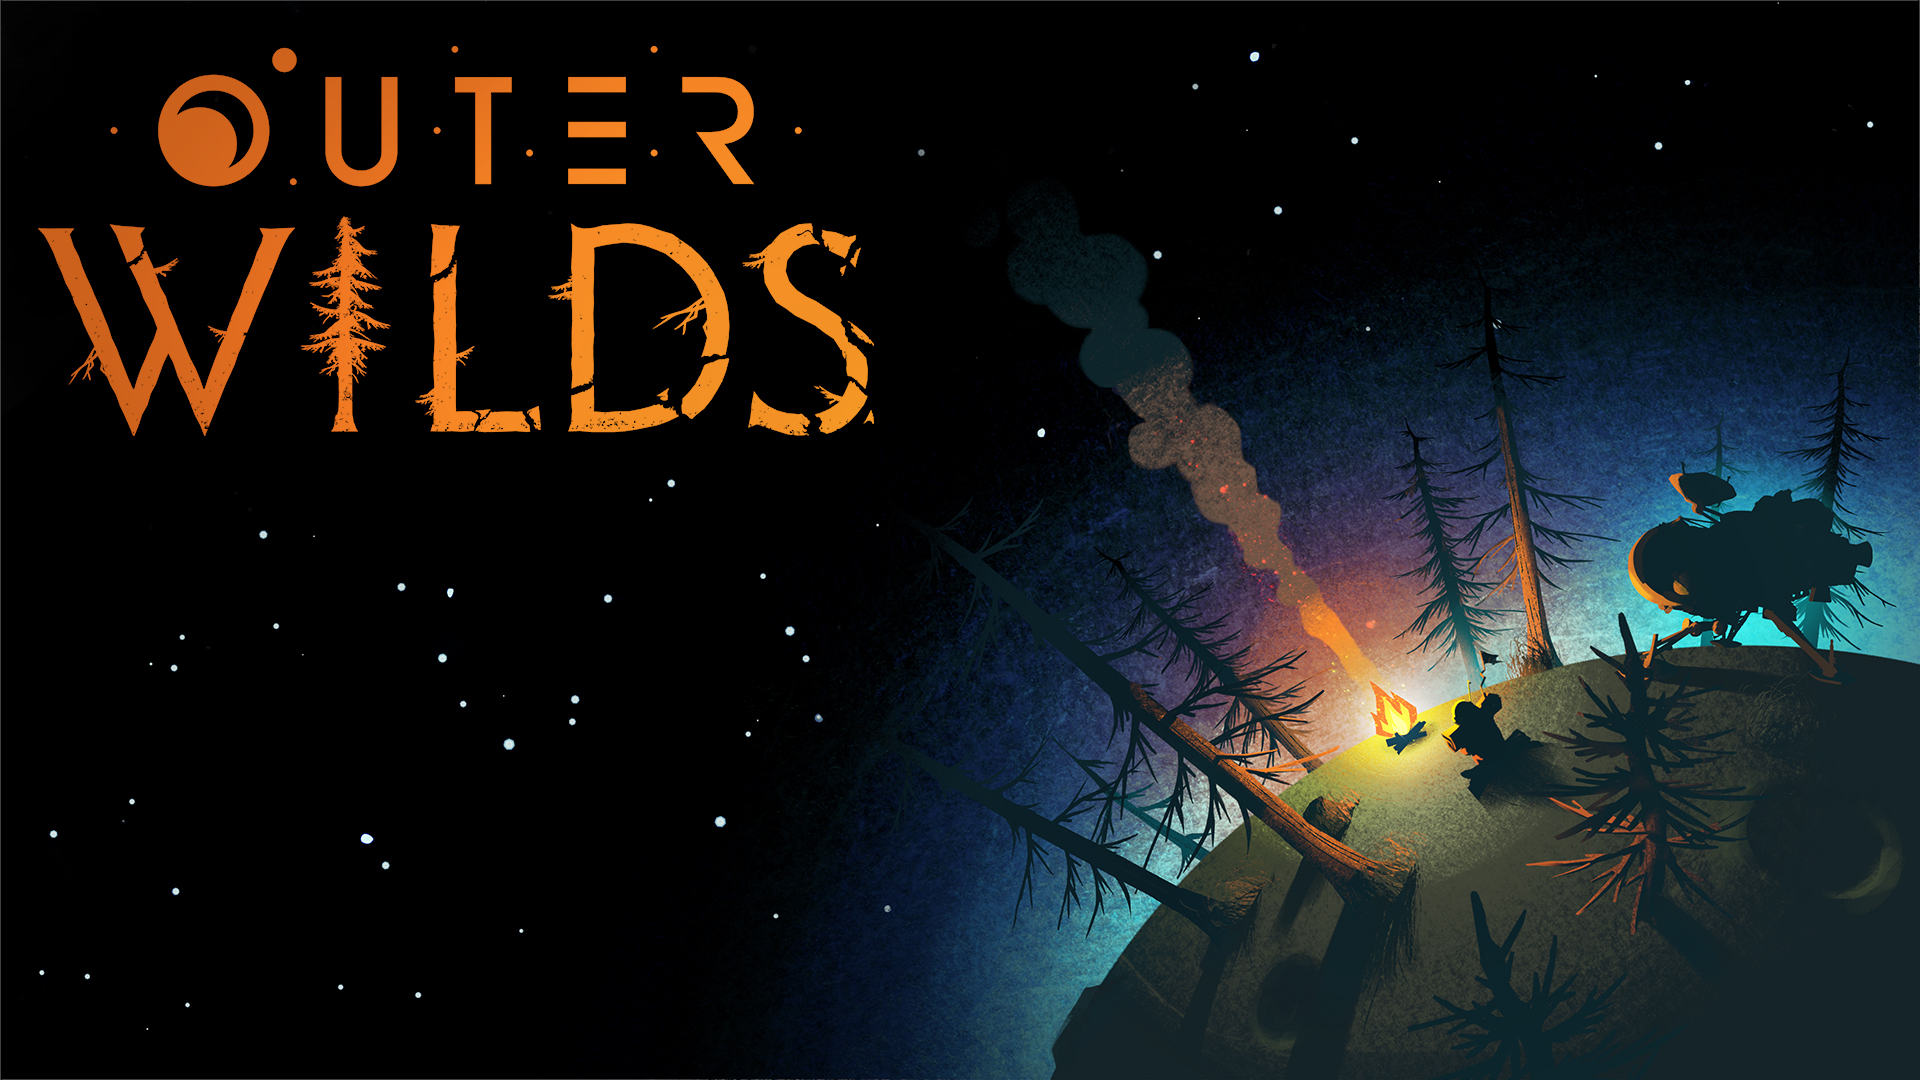 Outer wilds banner